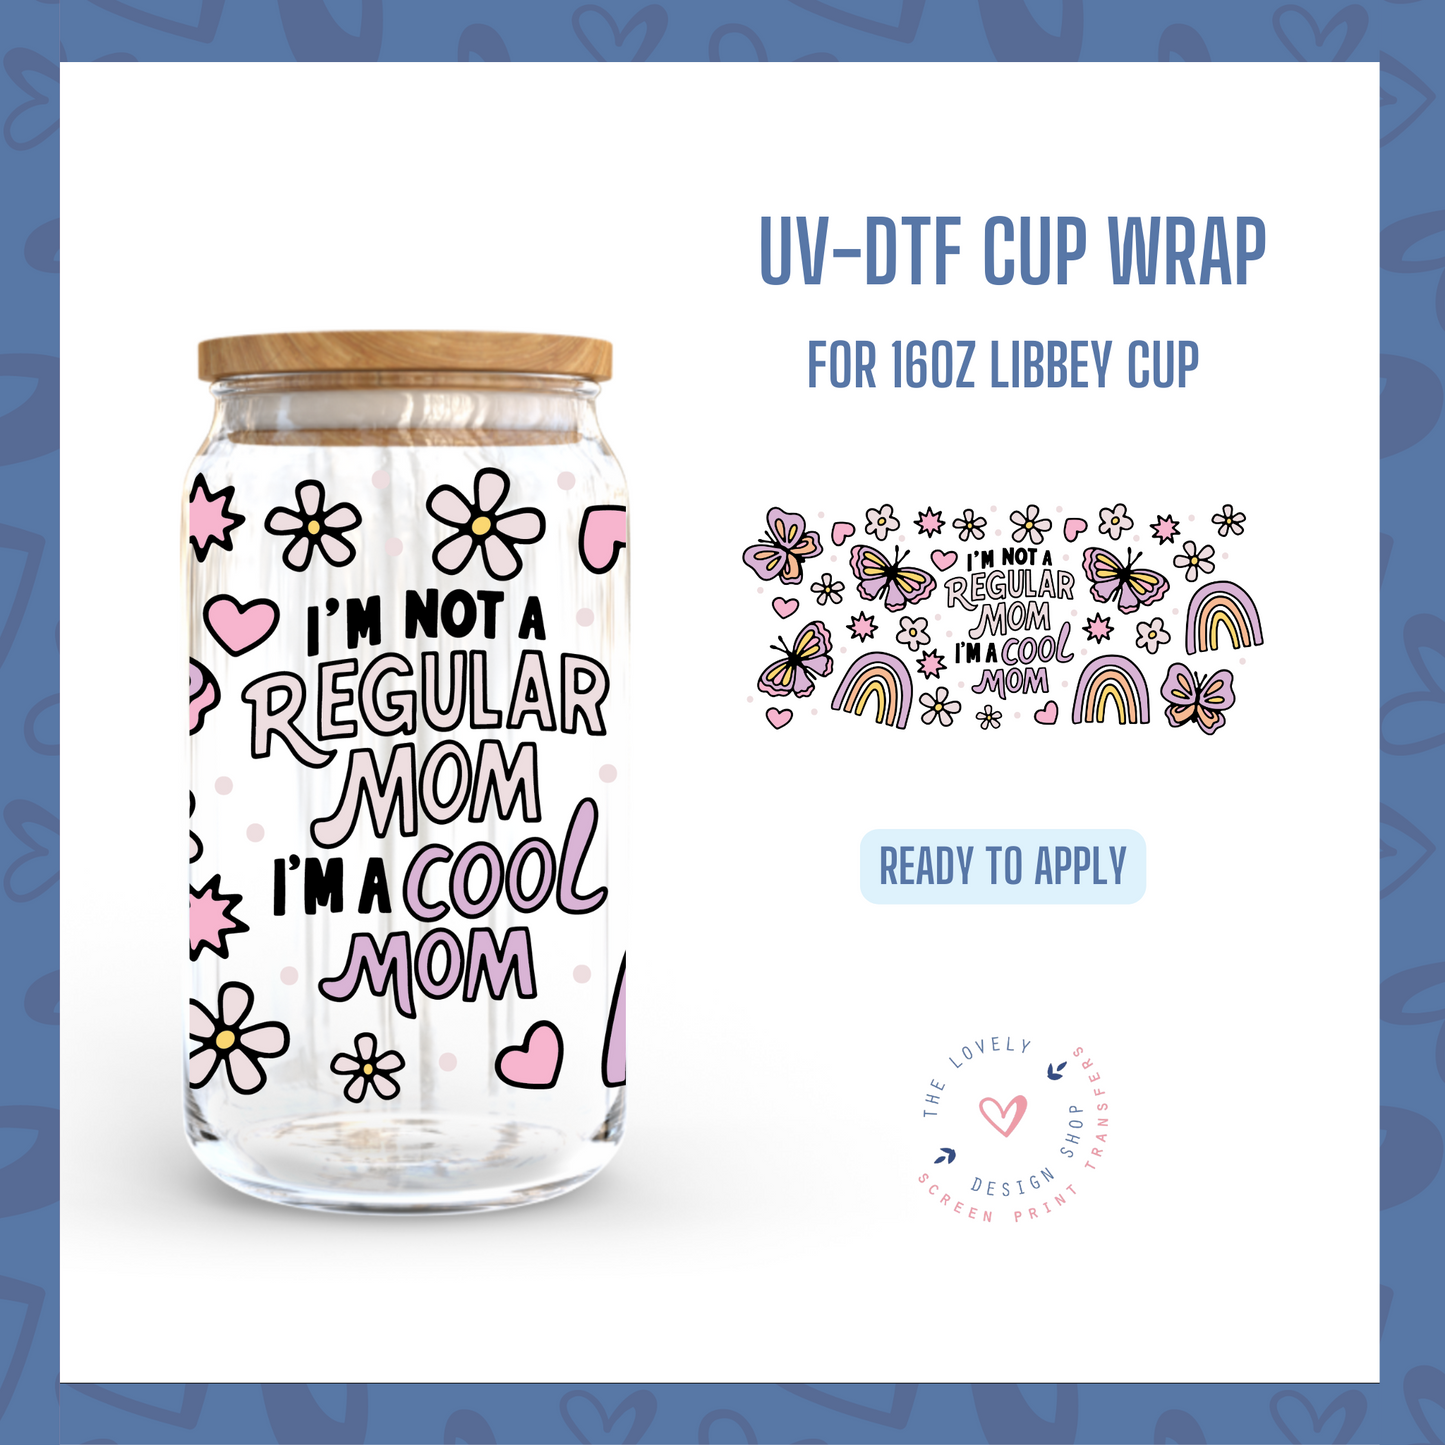 Not a Regular Cool Mom/Mum - UV DTF 16 oz Libbey Cup Wrap (Ready to Ship) Apr 22